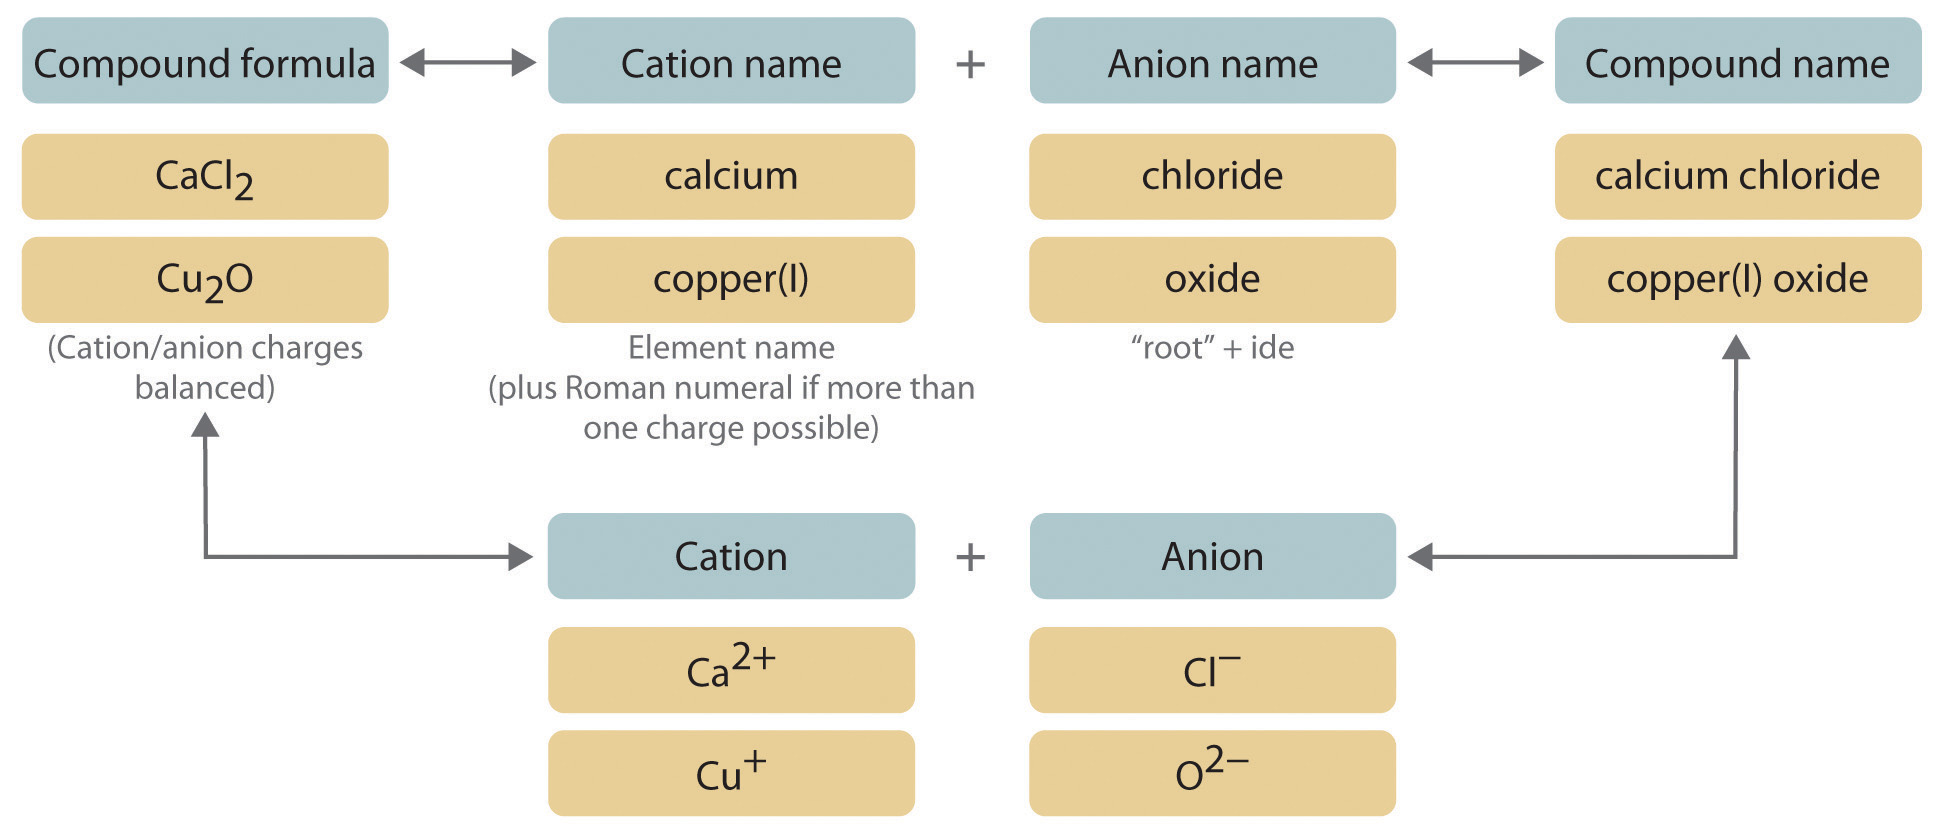 The compound formula has the cation and anion charges balanced. It is broken down into the cation name and anion name (such as calcium and chlorine), the anion is given the ending -ide which gives the name calcium chloride.